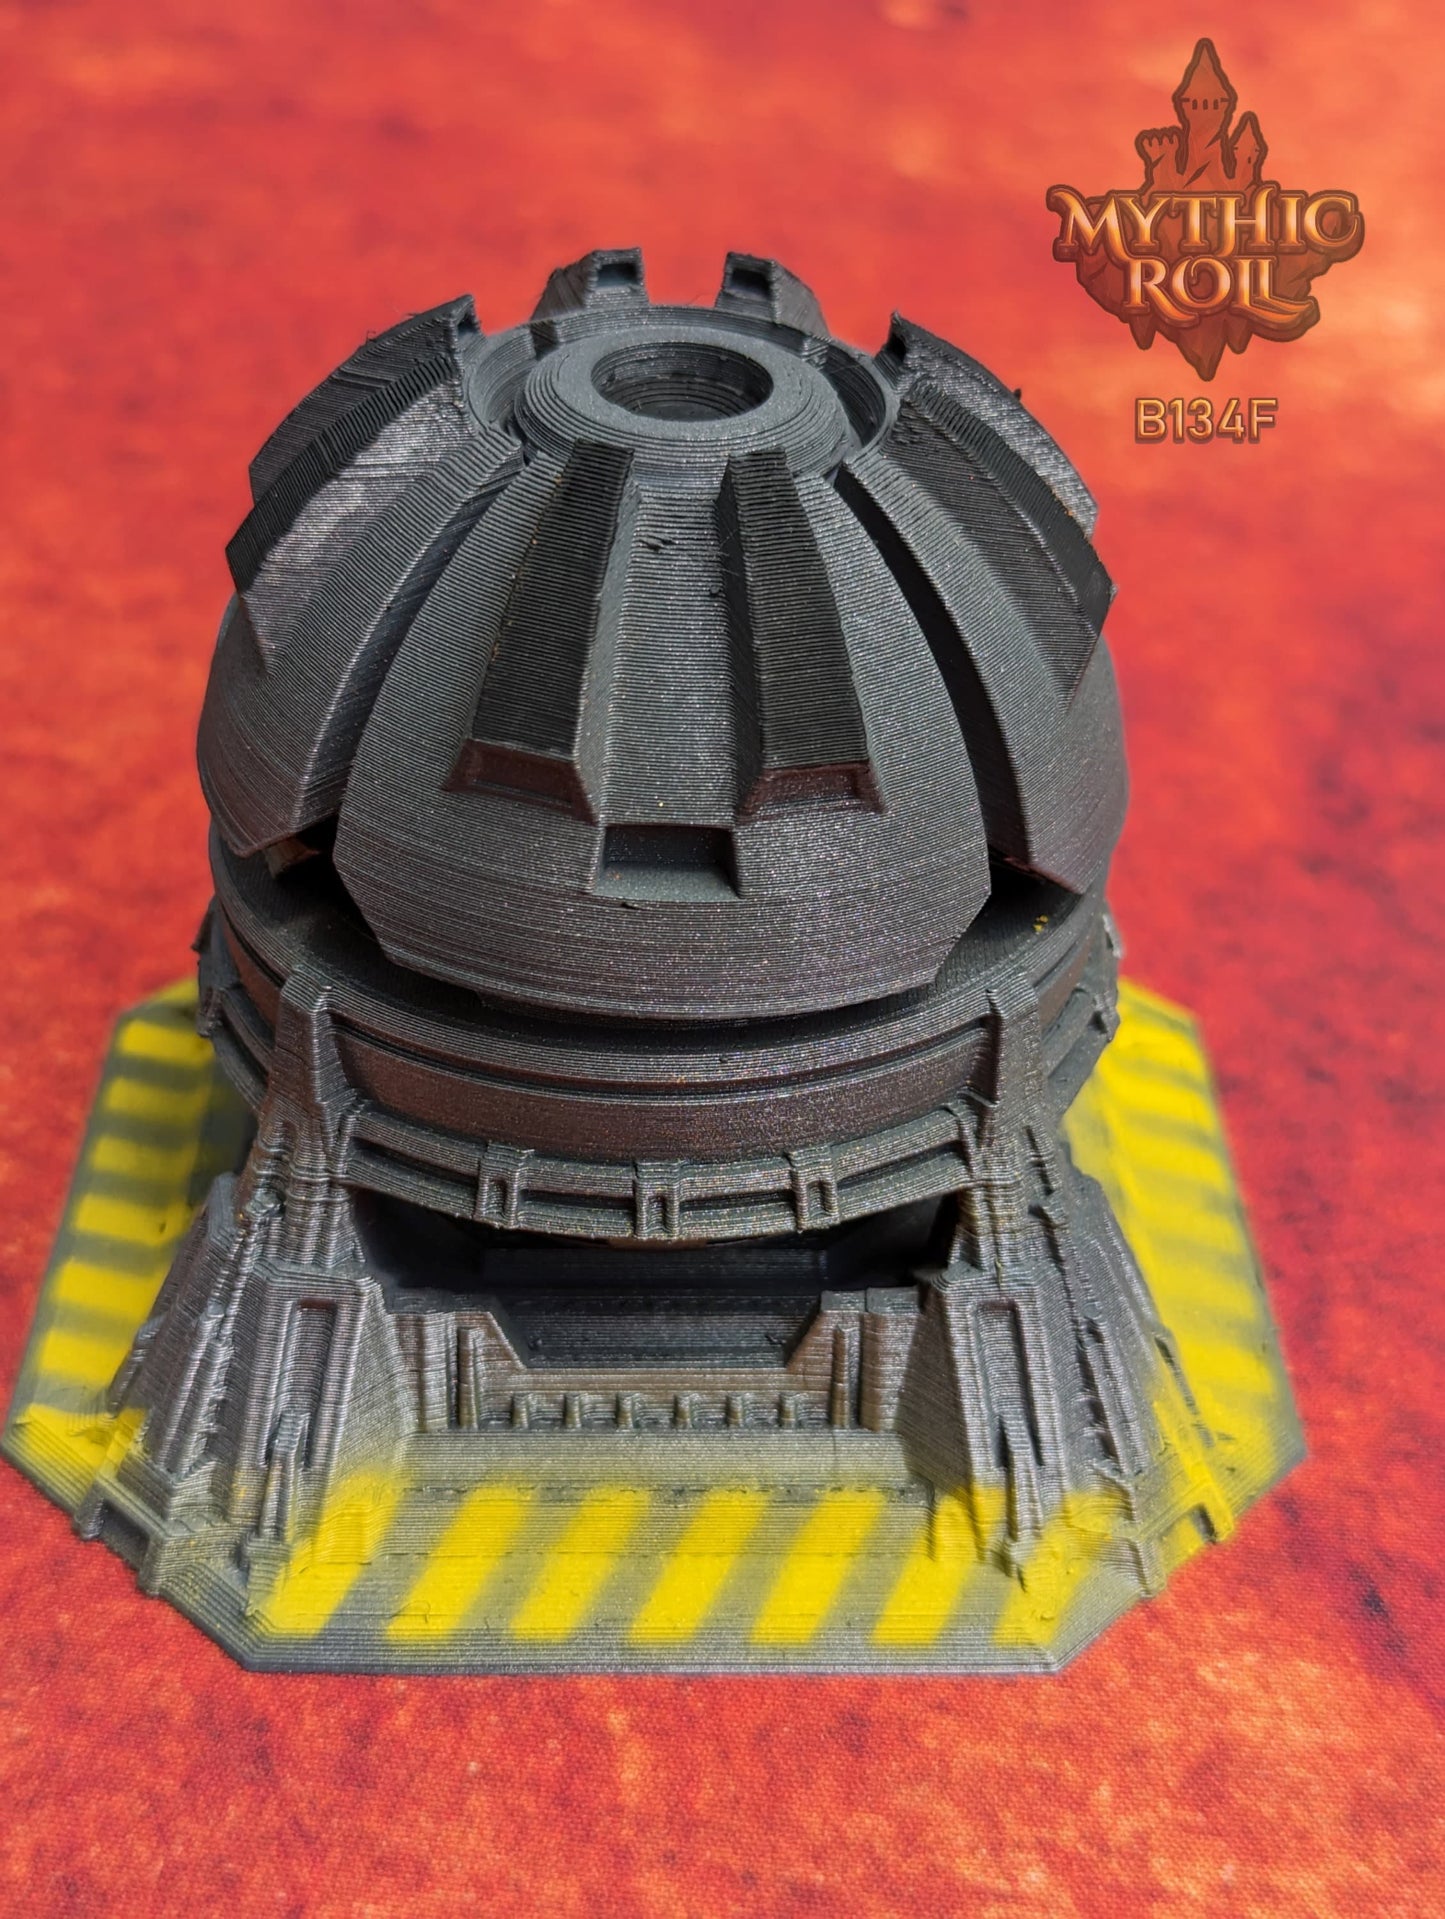 Space Pod 3D Printed Cyberpunk Dice Vault - Mythic Roll Collection by Unchained Games | RPG Dice Jail | D20 Dice Box | -Your Odyssey Awaits!